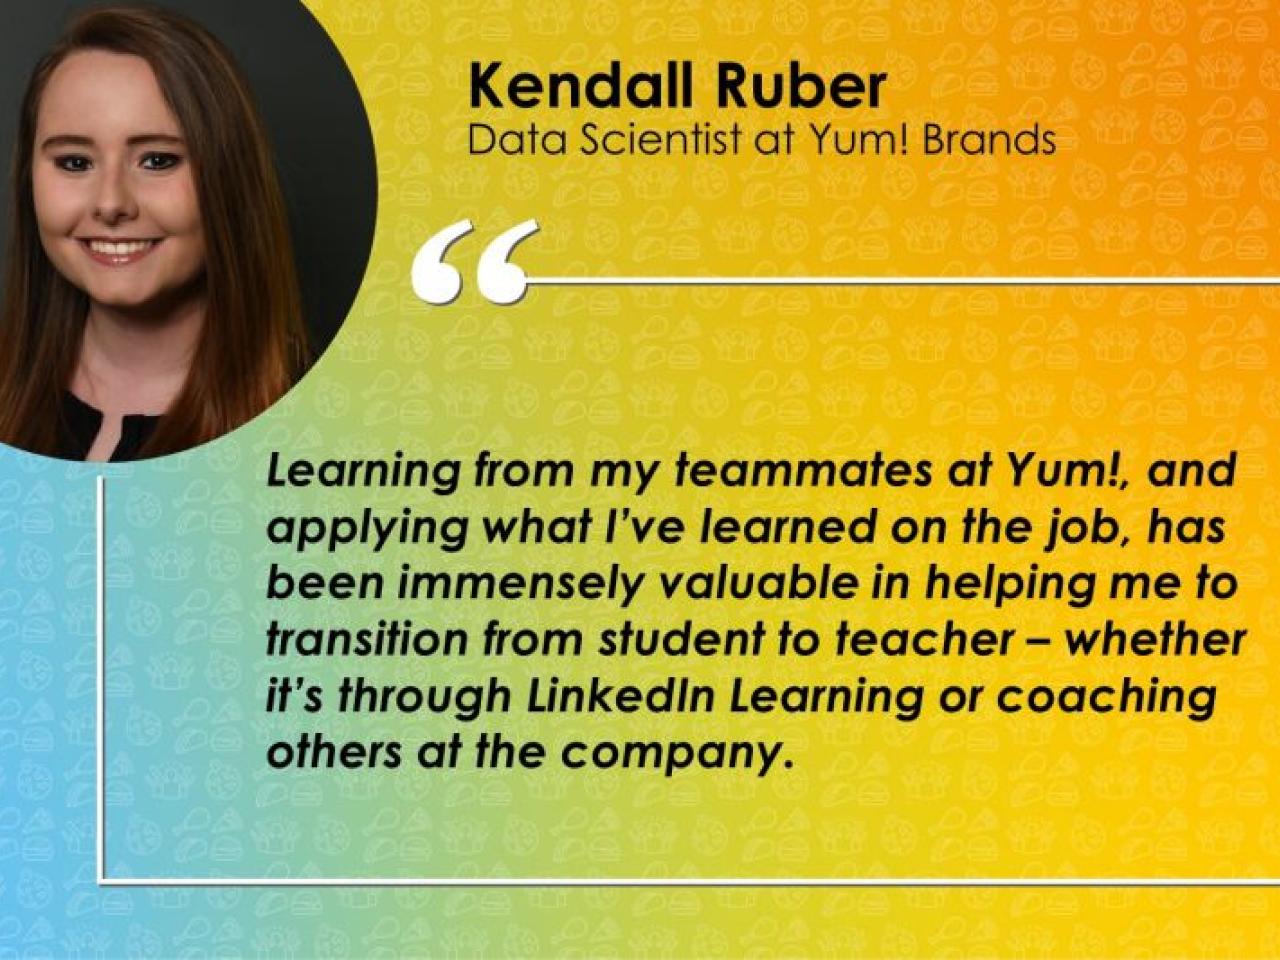 Kendall Ruber Data Scientist at Yum! Brands and quote.